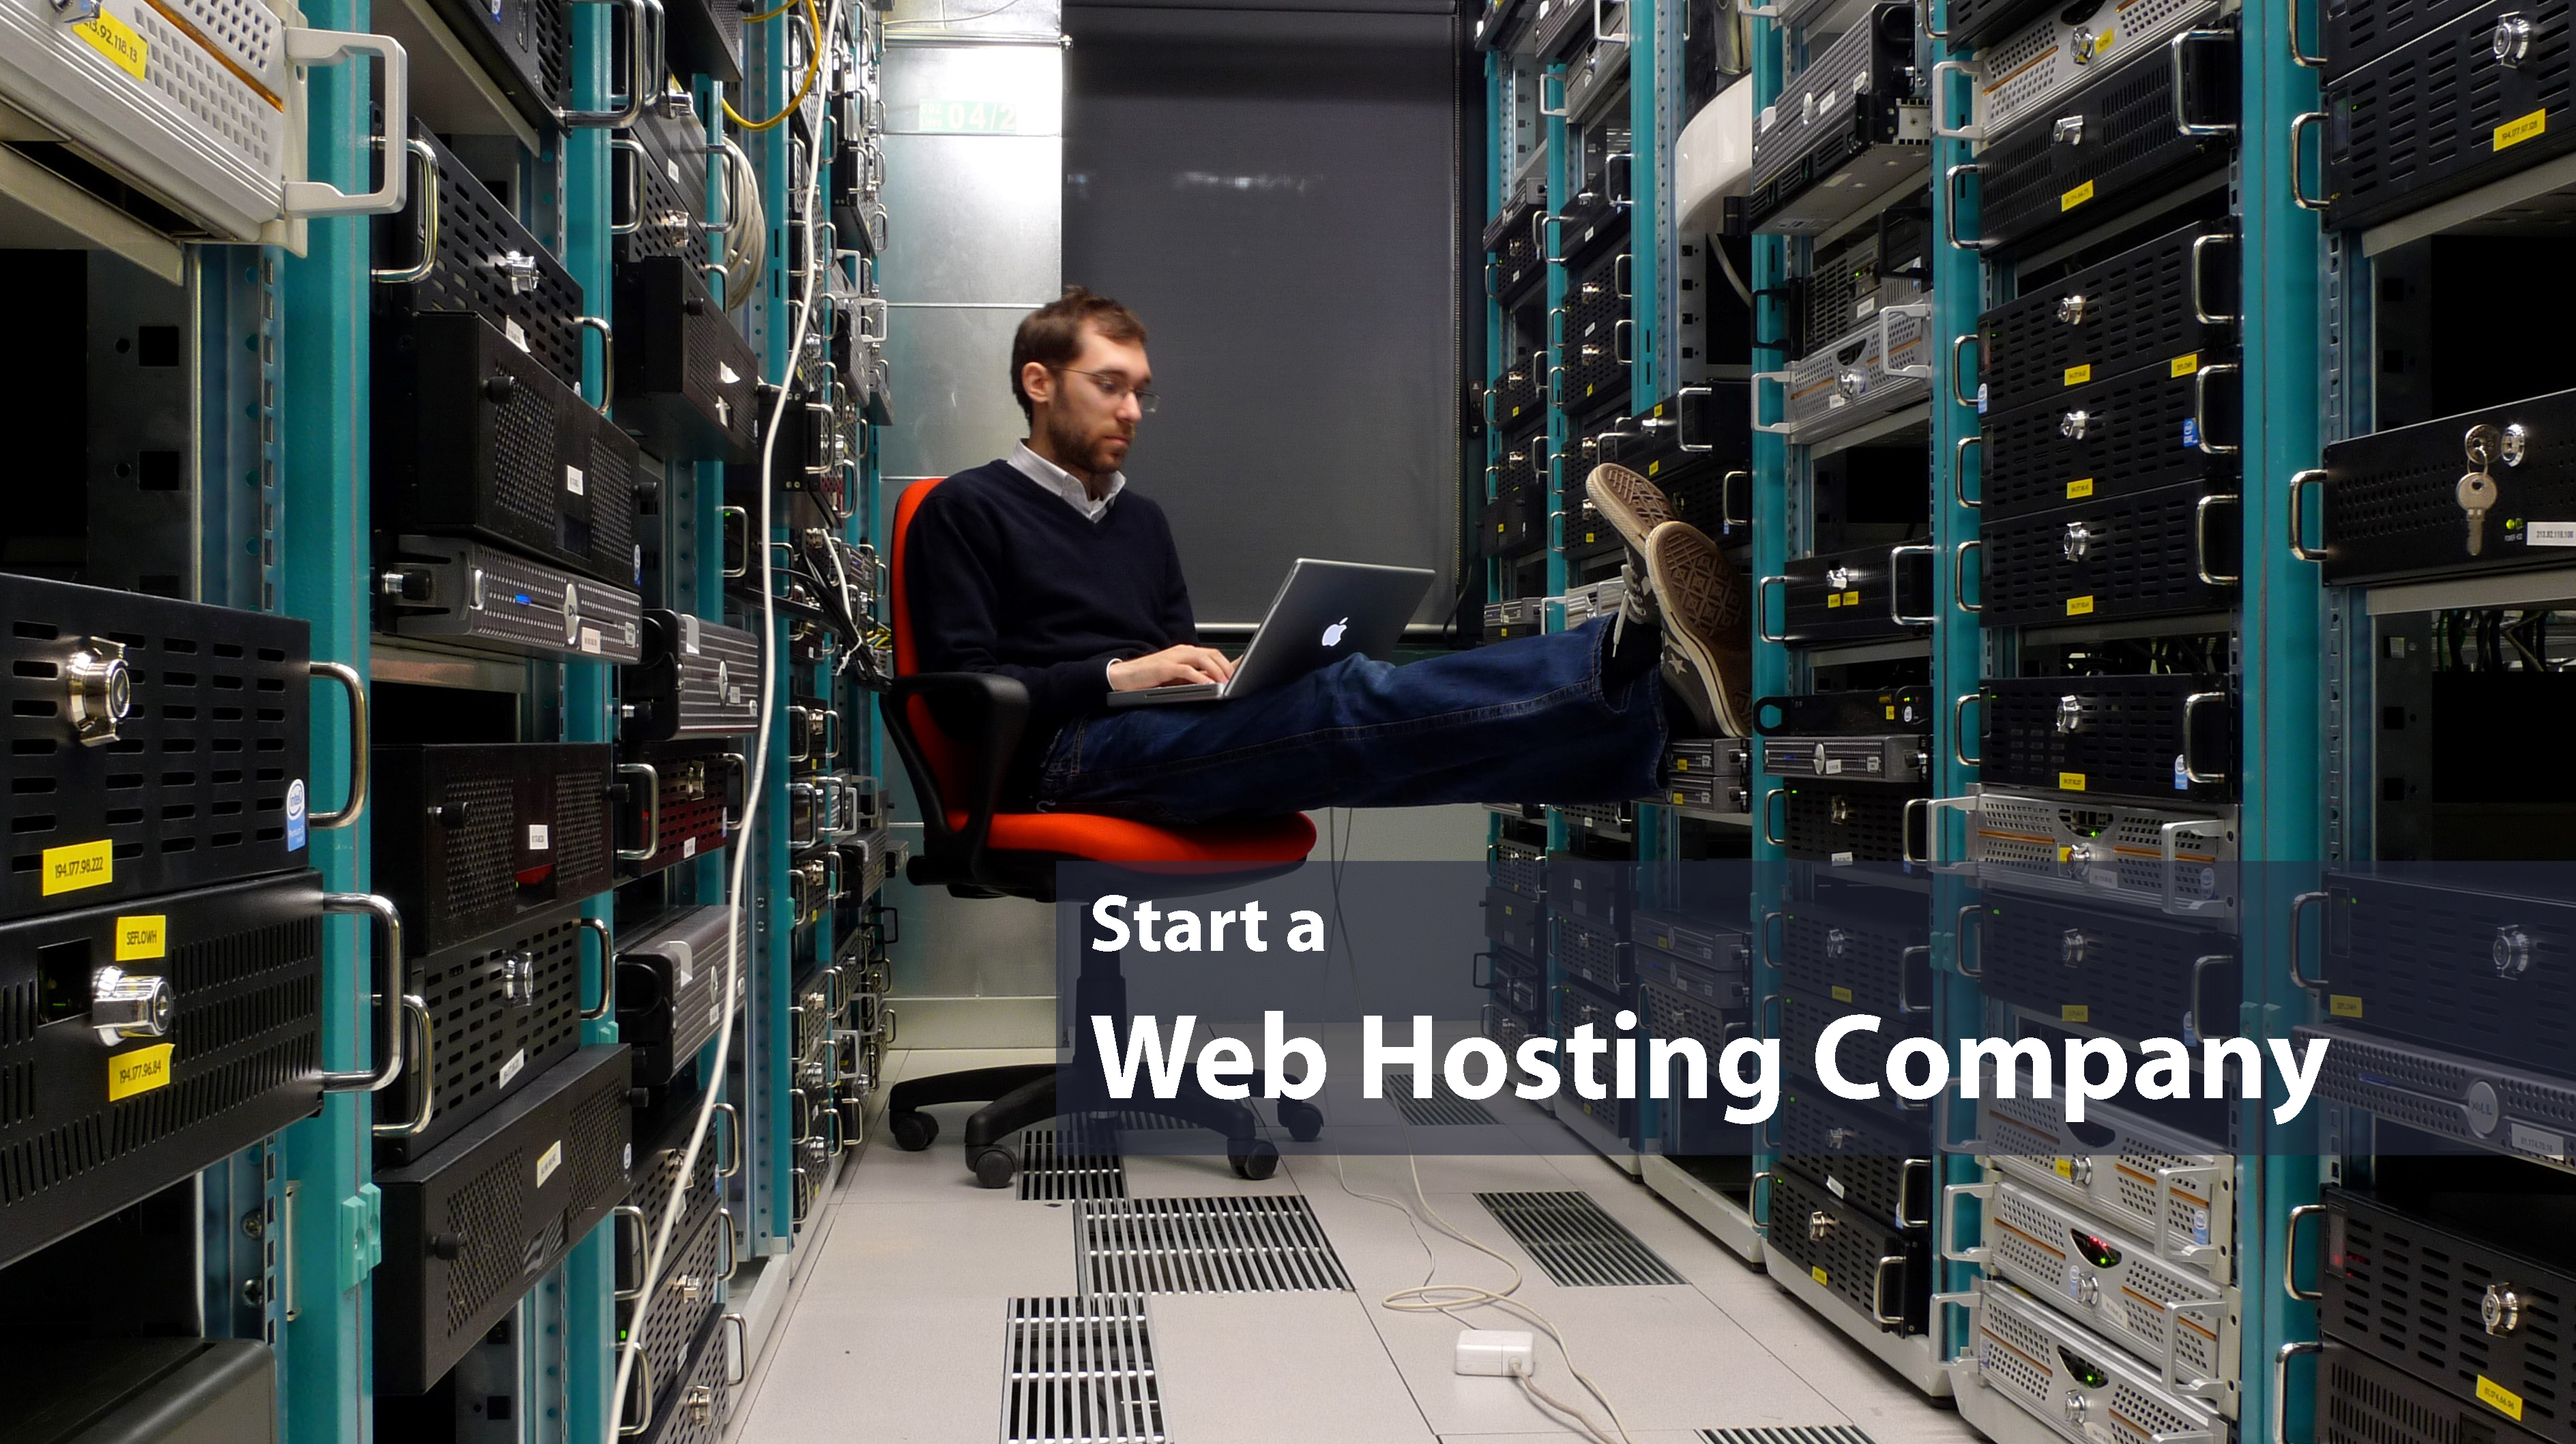 Choose WHMCS Themes for Launching A Web Hosting Business